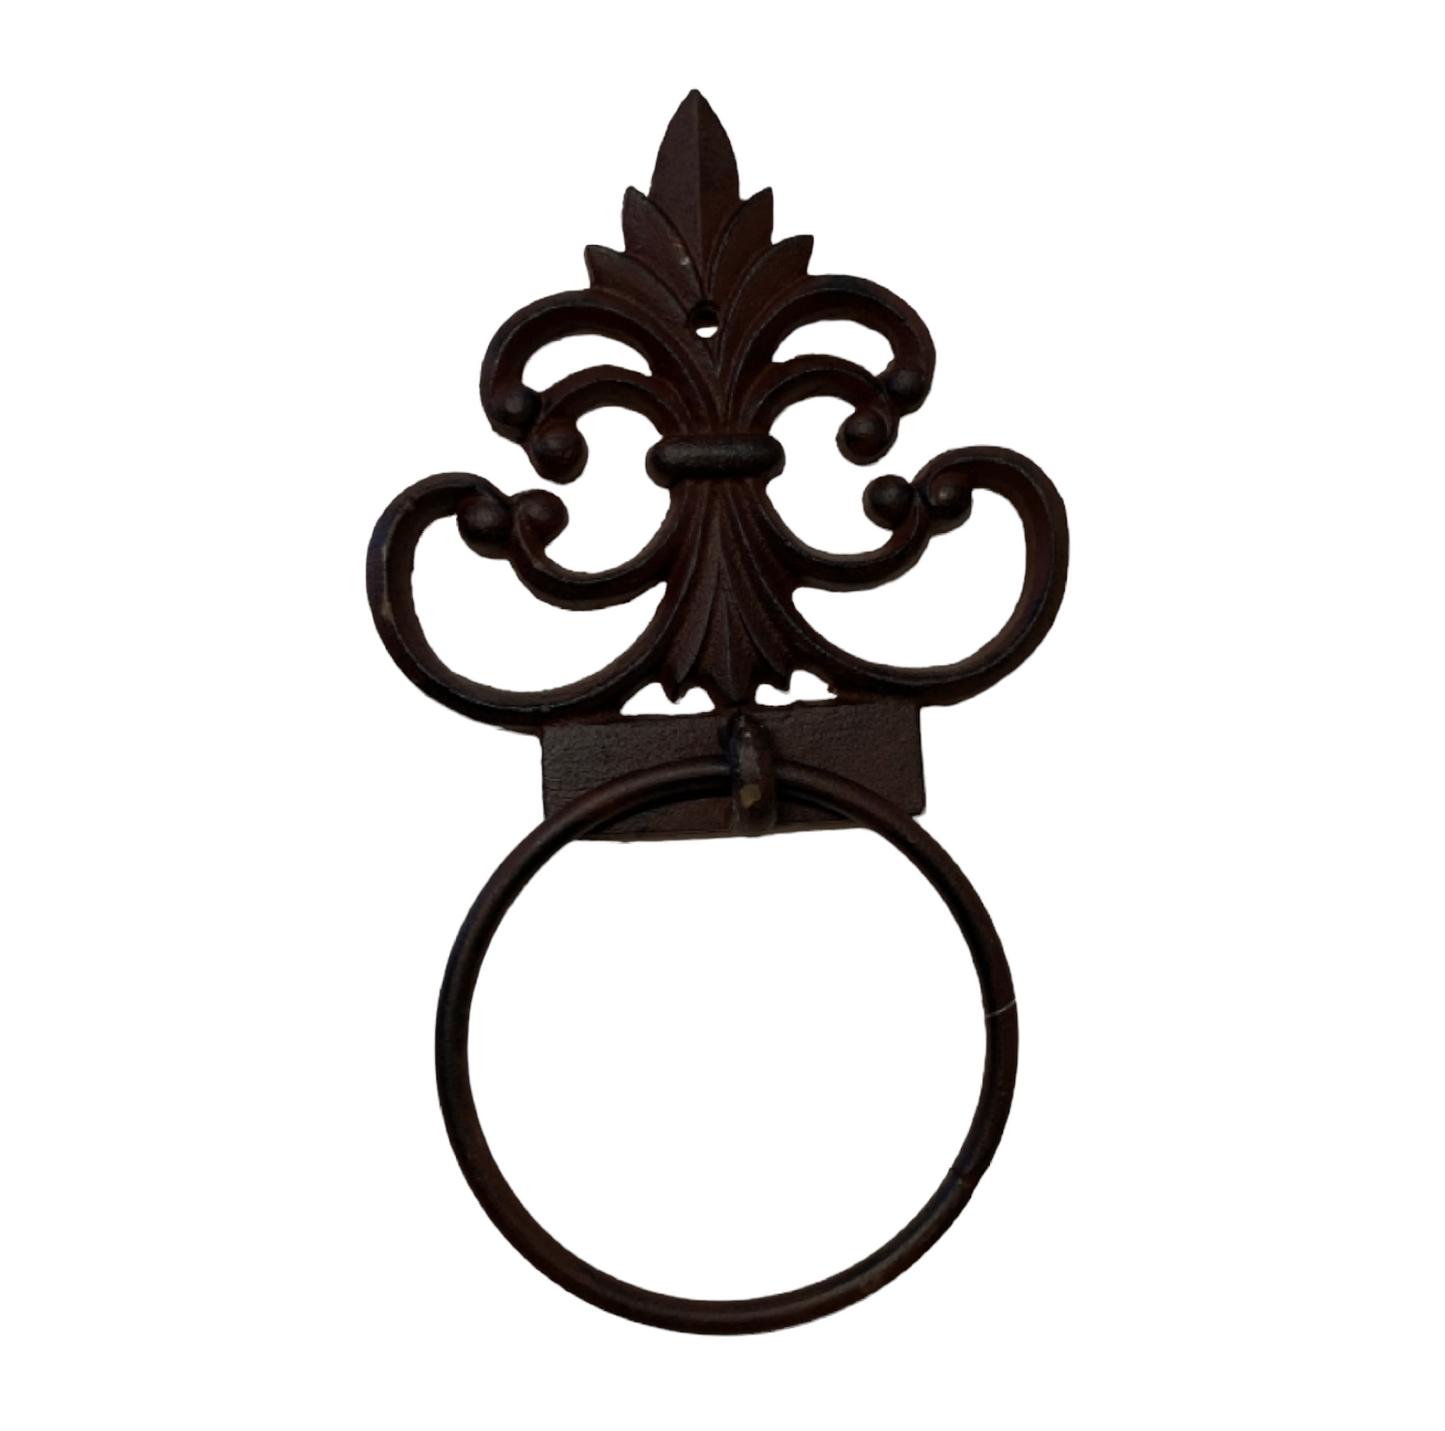 Towel Holder Vintage Iron - The Renmy Store Homewares & Gifts 